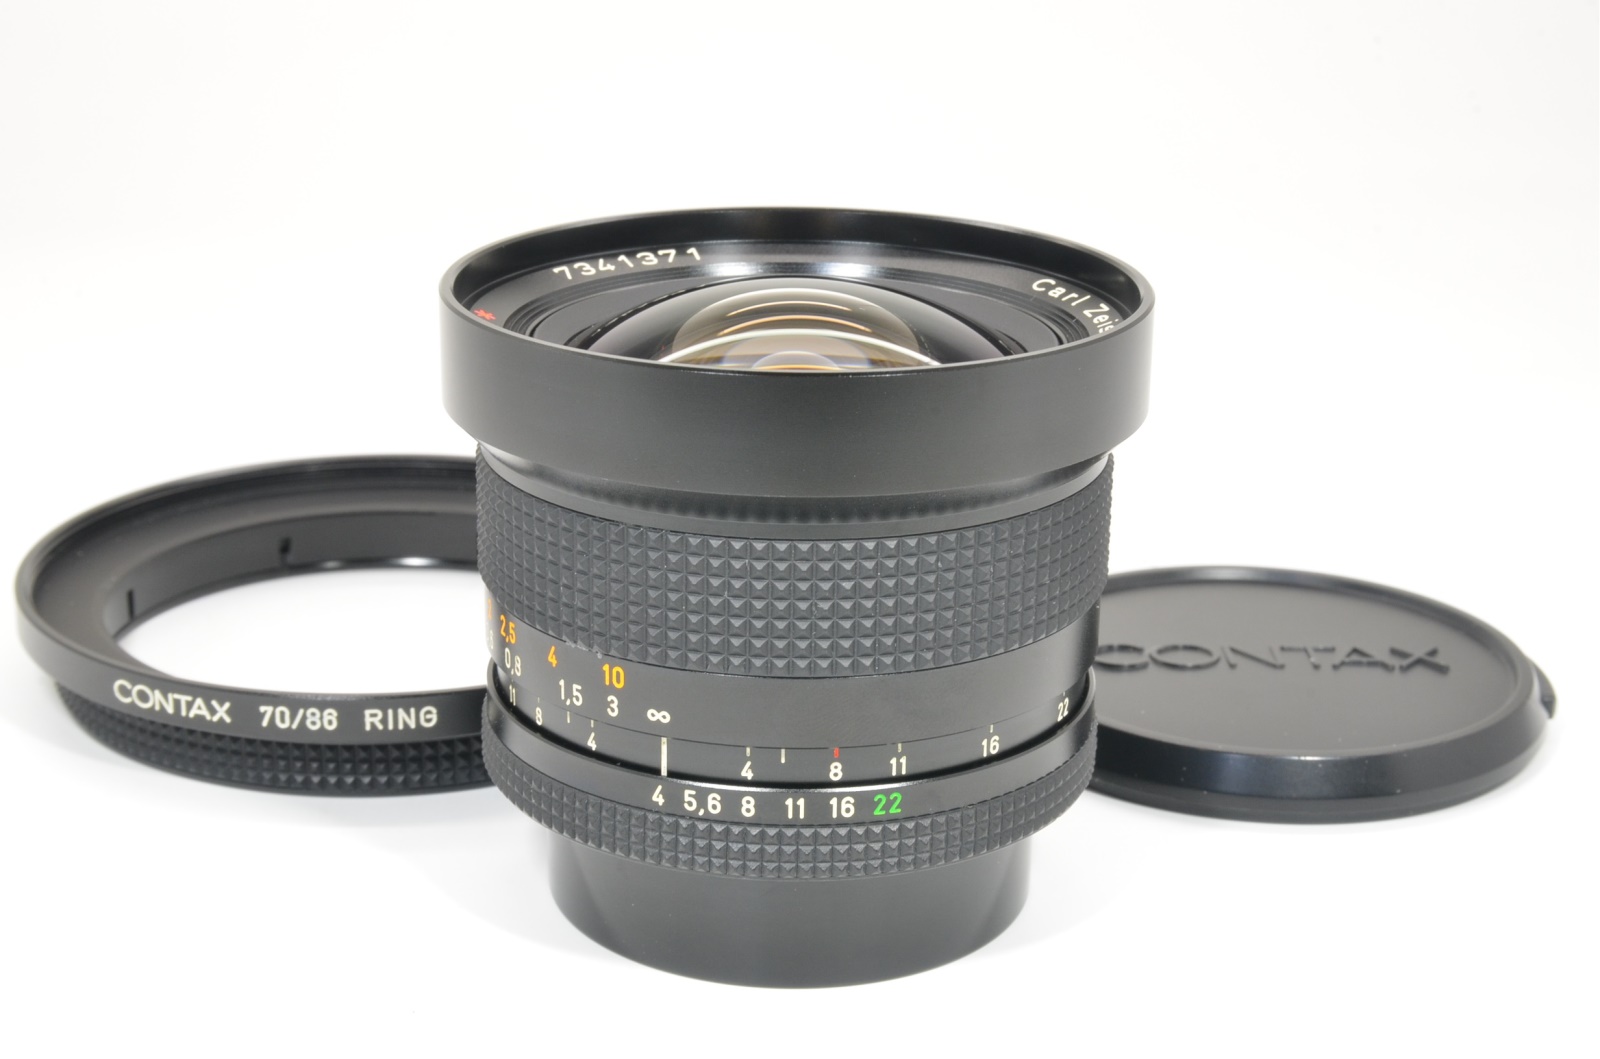 CONTAX Carl Zeiss Distagon T* 18mm f4 MMJ Japan with 70/86 RING 